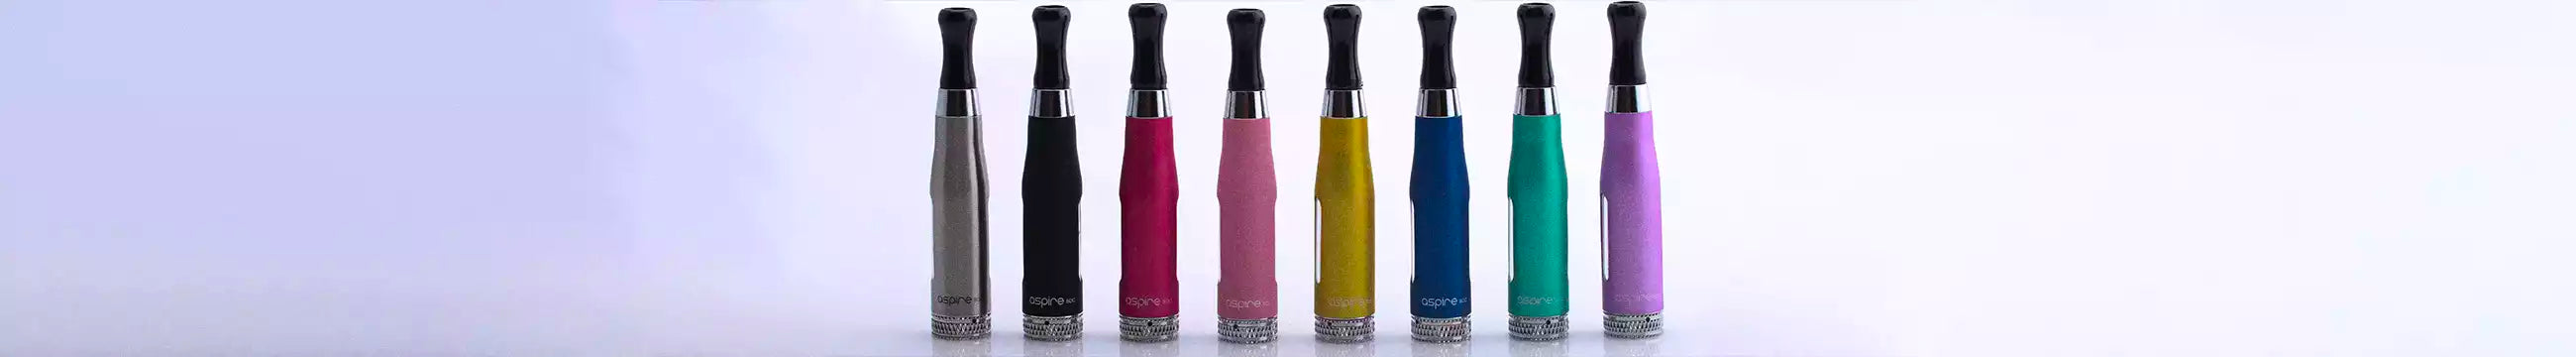 CE5 UK | CE5-S Tanks | Buy Clearomizer Devices Online